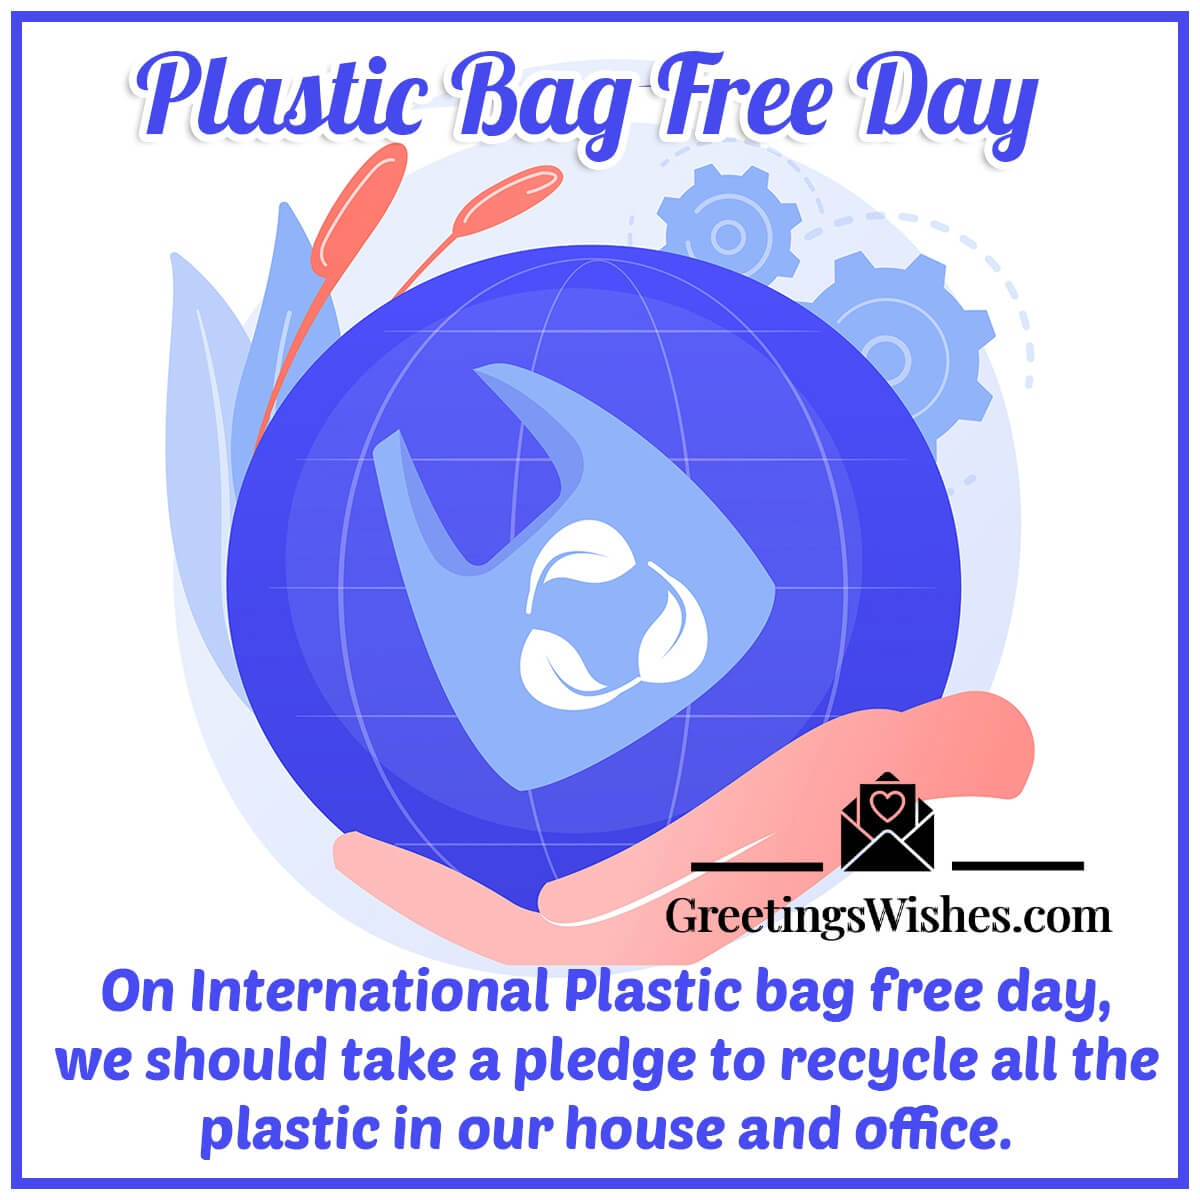 Plastic Bag Free Day Message